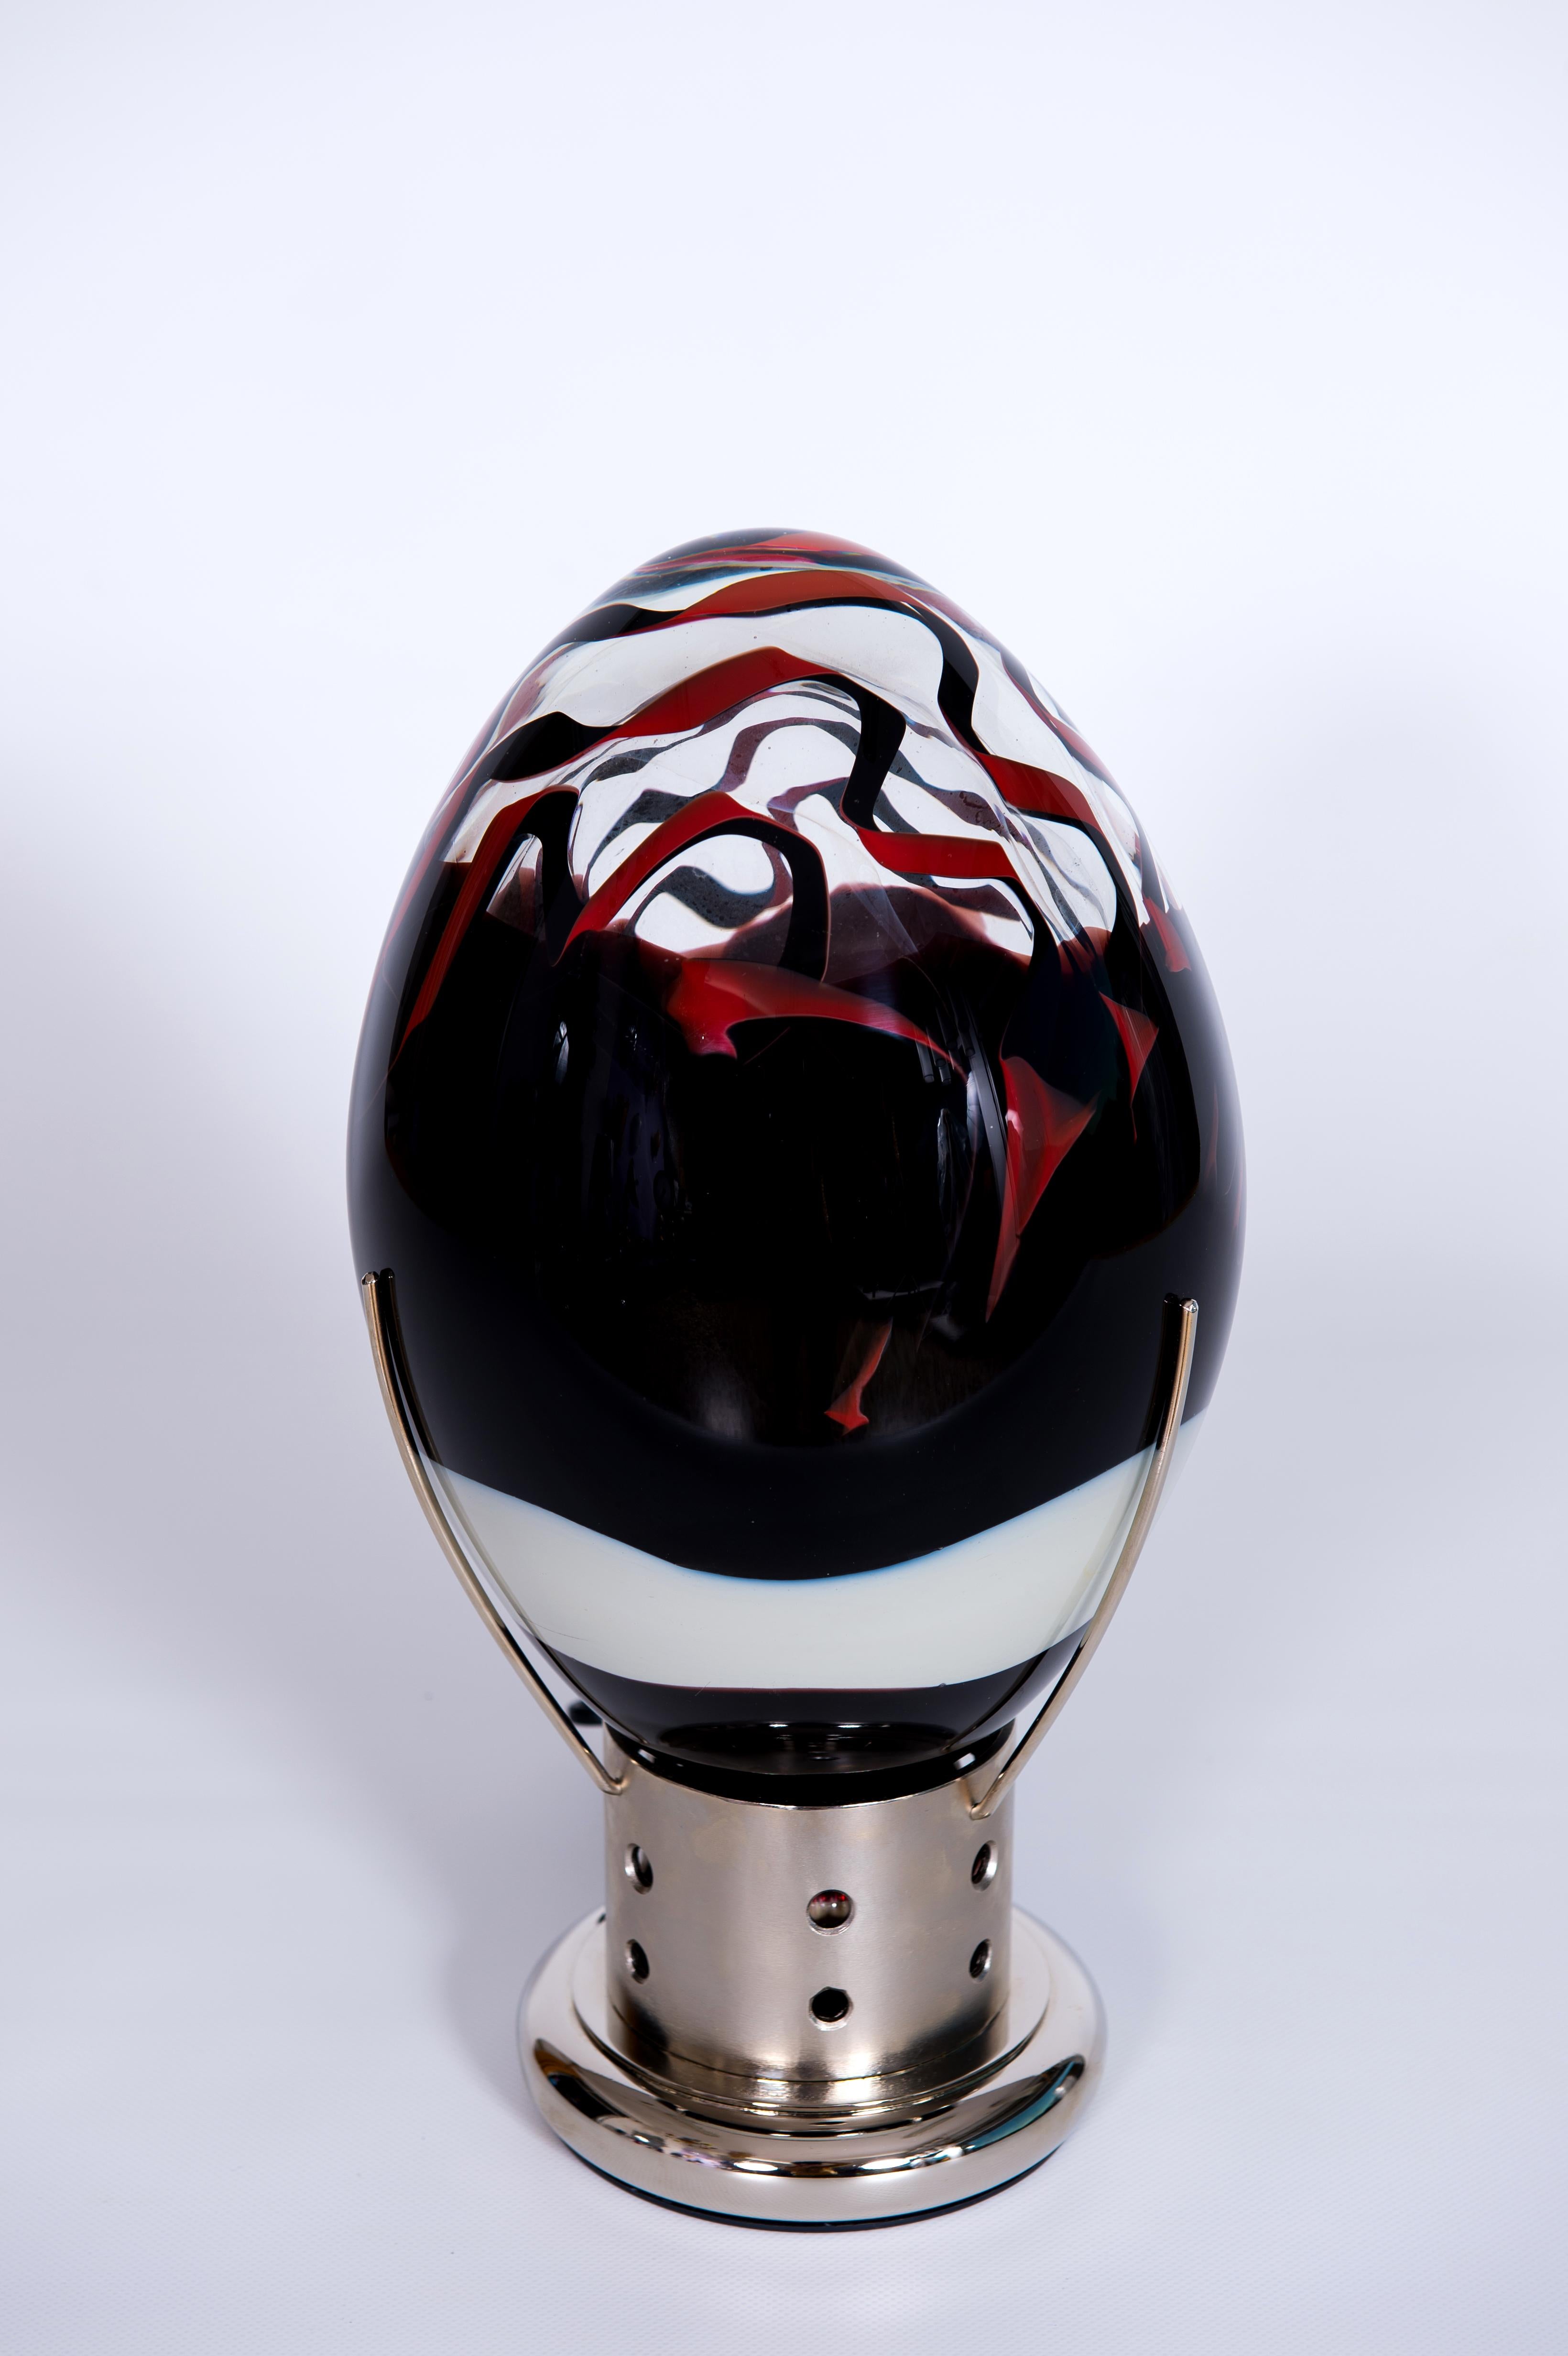 Elegant Venetian Egg Lamp Murano Glass Vibrant Red Dark Metal Base 1990s Italy.
A remarkable Venetian egg table lamp, boasting a vibrant red Murano glass shell and a polished metal base.
A mesmerizing Venetian egg table lamp, meticulously handblown